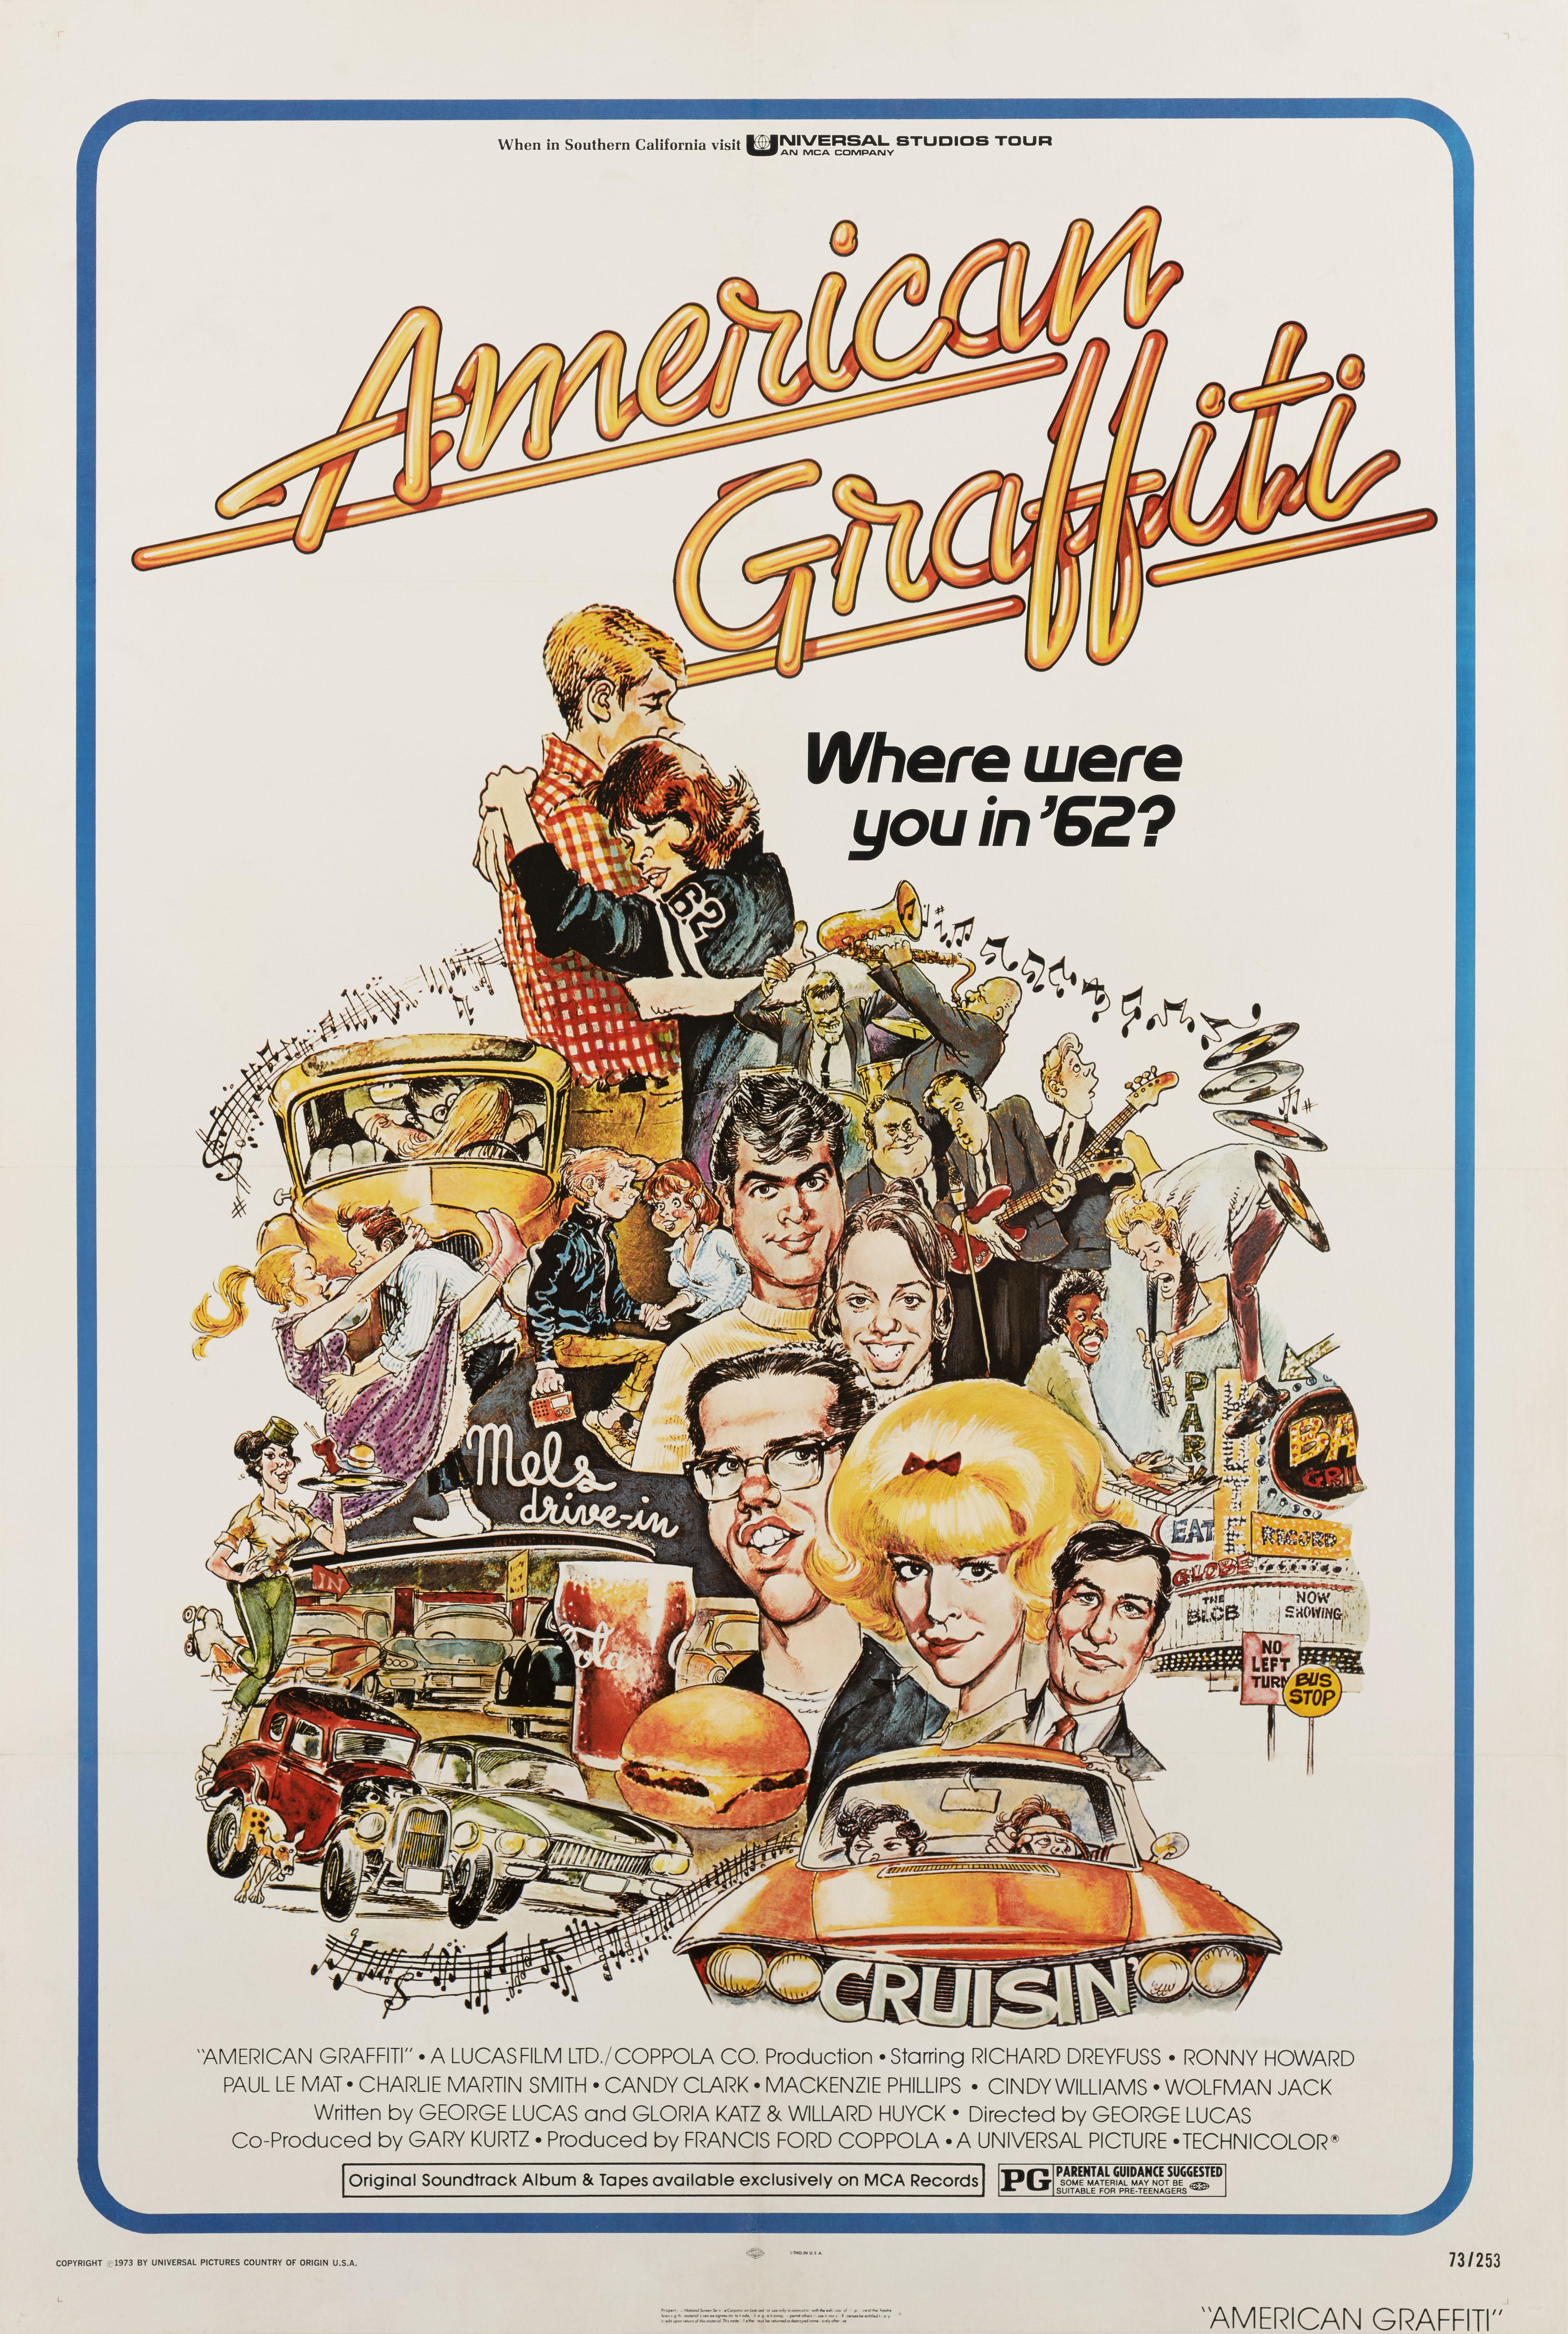 Original US film poster for the 1973 Comedy, drama directed by George Lucas and starring Richard Dreyfuss, Ron Howard and Paul Le Mat.
This poster is conservation linen backed and it would be shipped rolled in a strong tube.